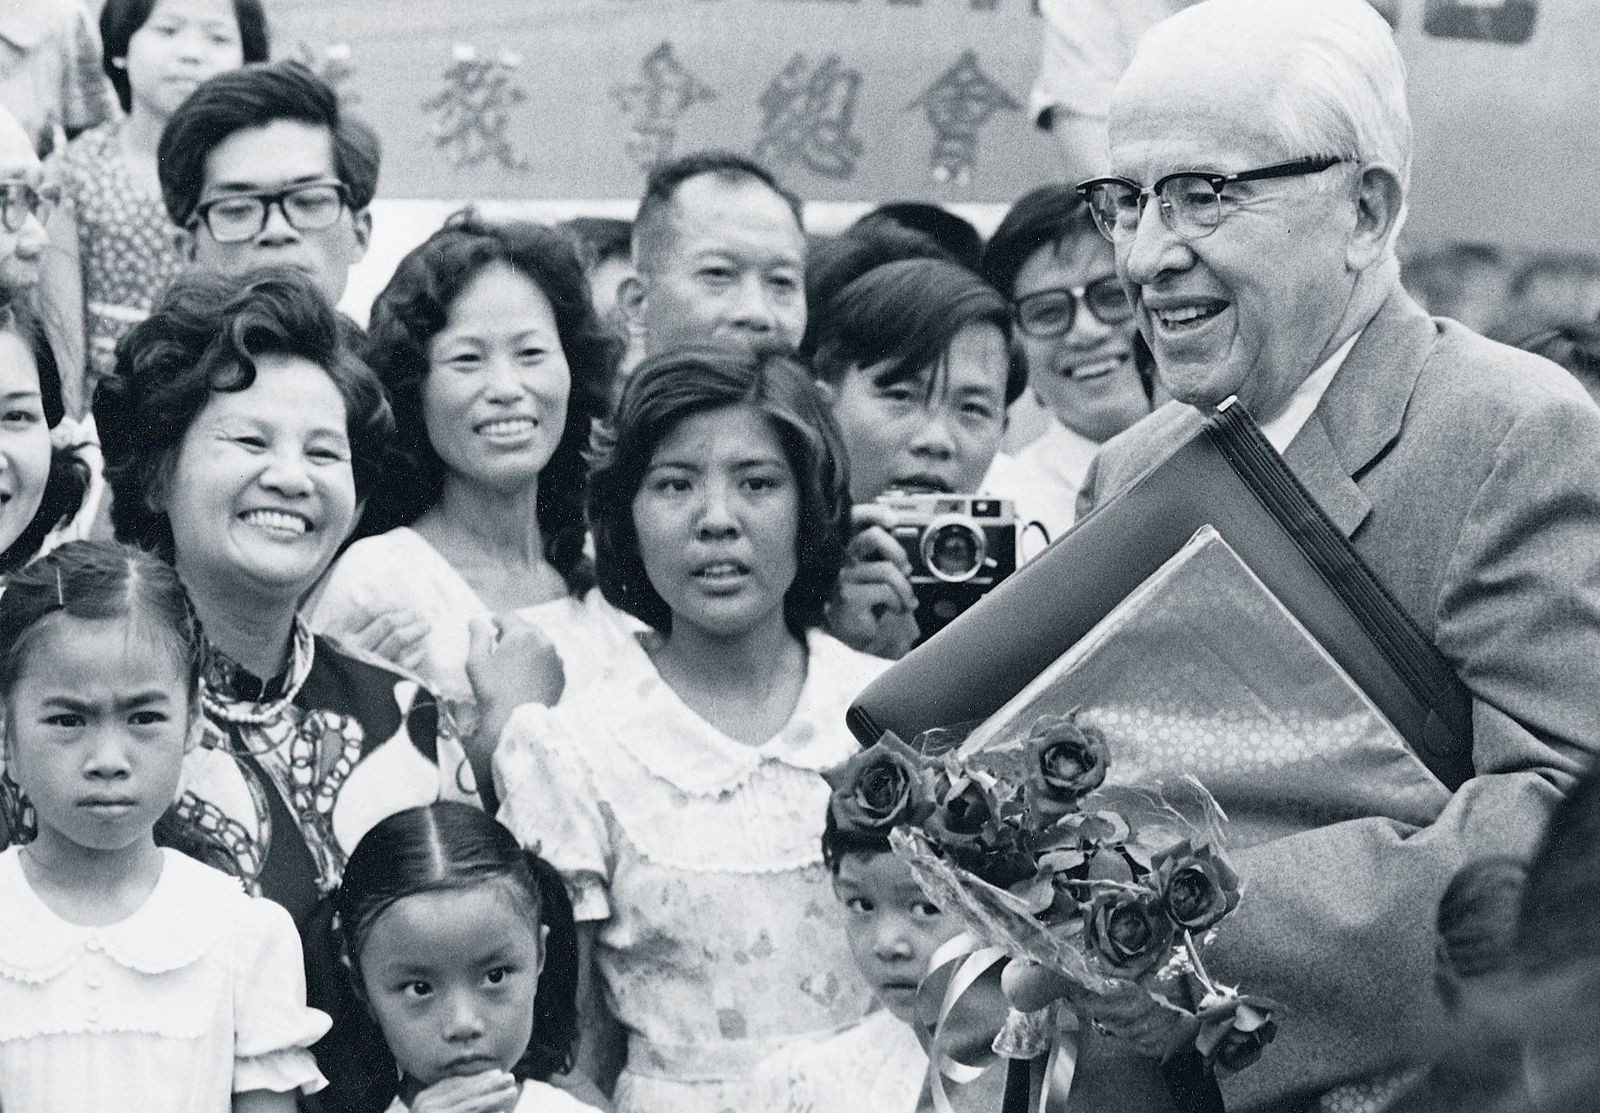 President Benson standing with members in Taiwan, around 1980.